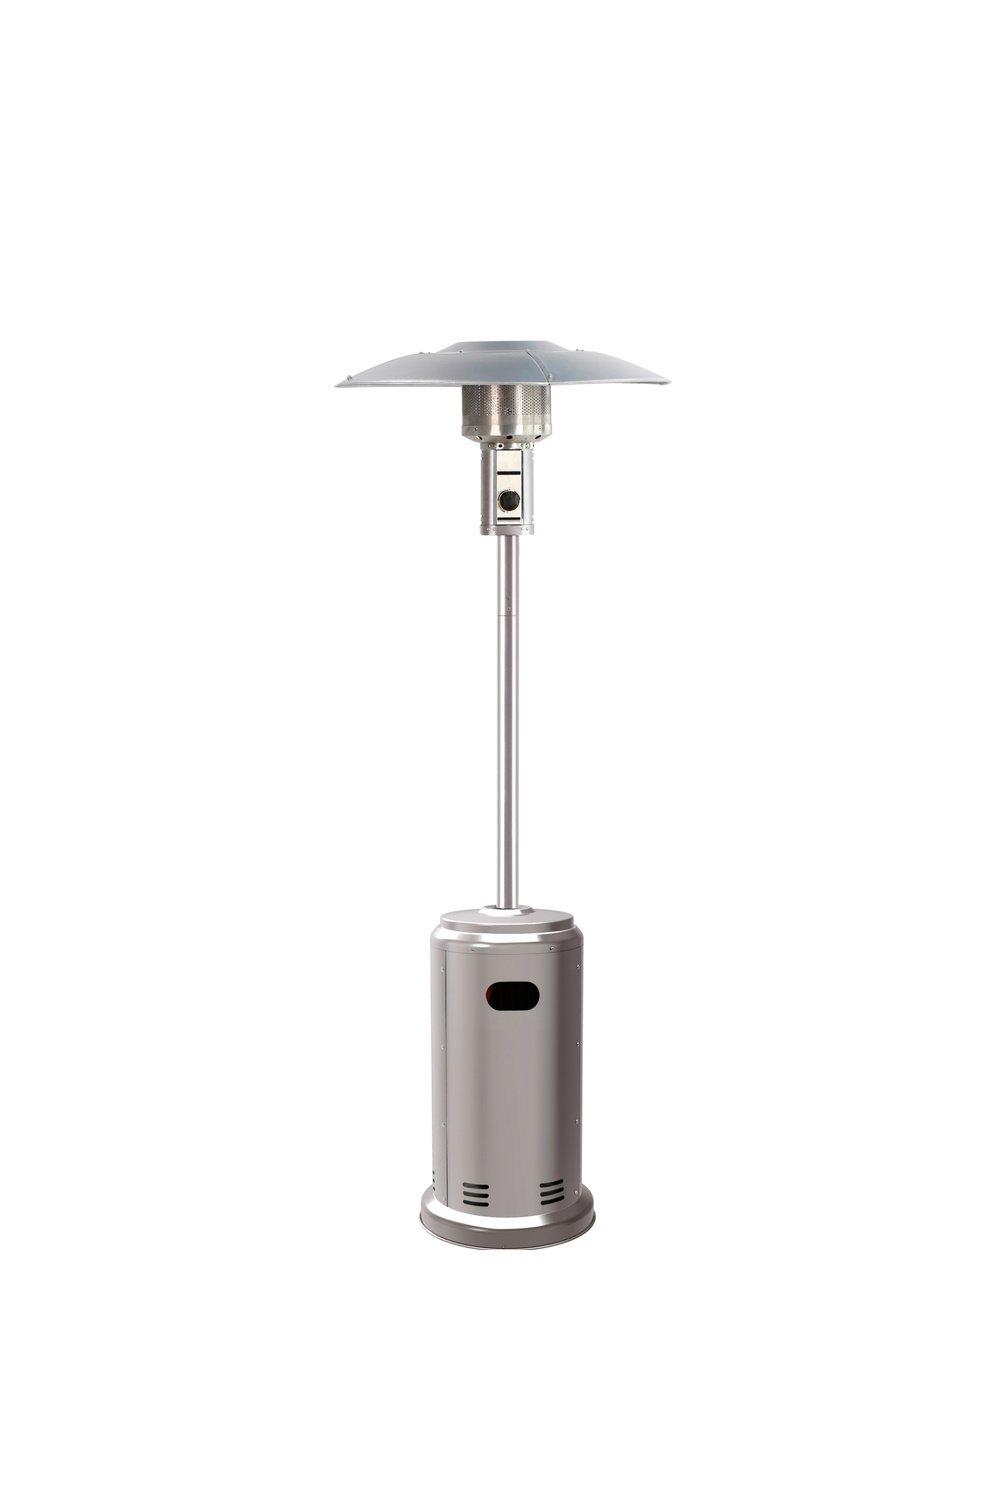 County Stainless Steel 8.8kW Gas Patio Heater